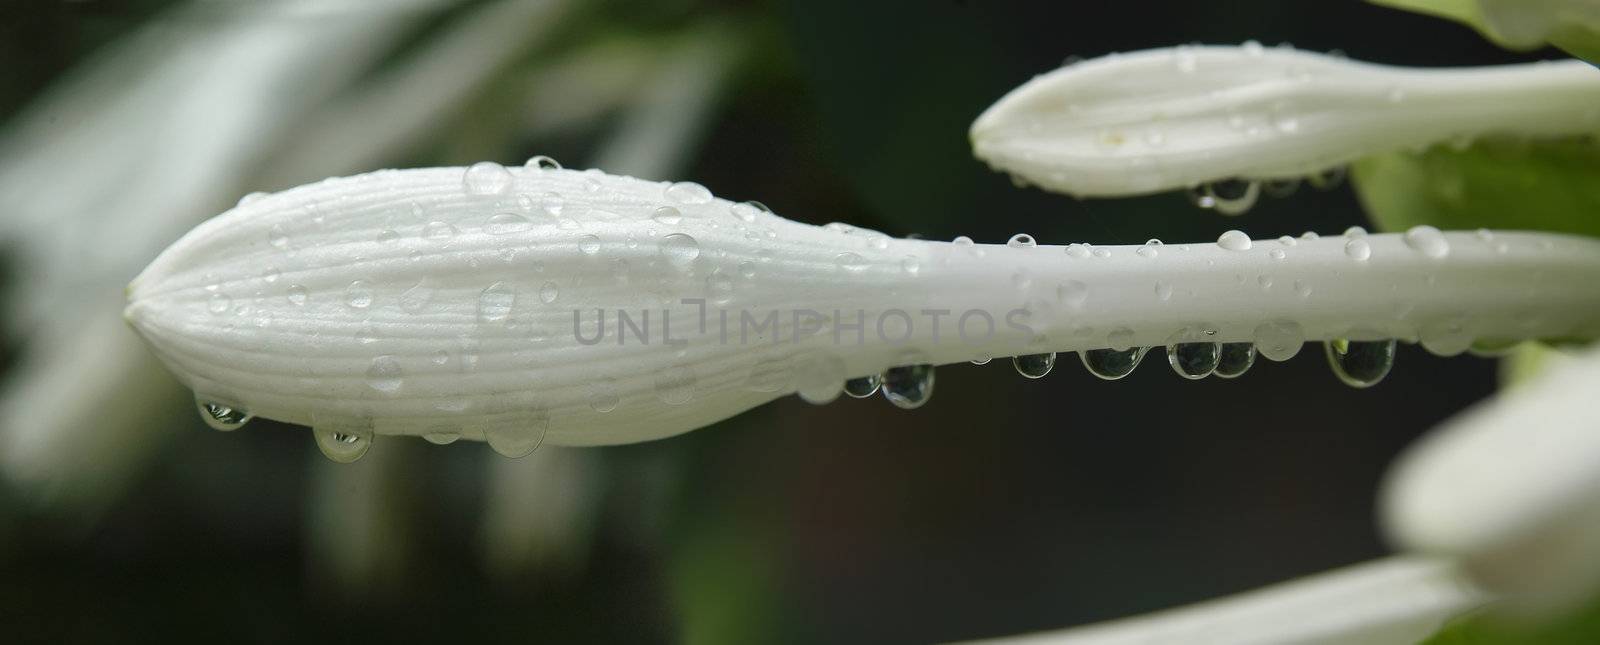 Panorama from the lily flower sprinkled with water